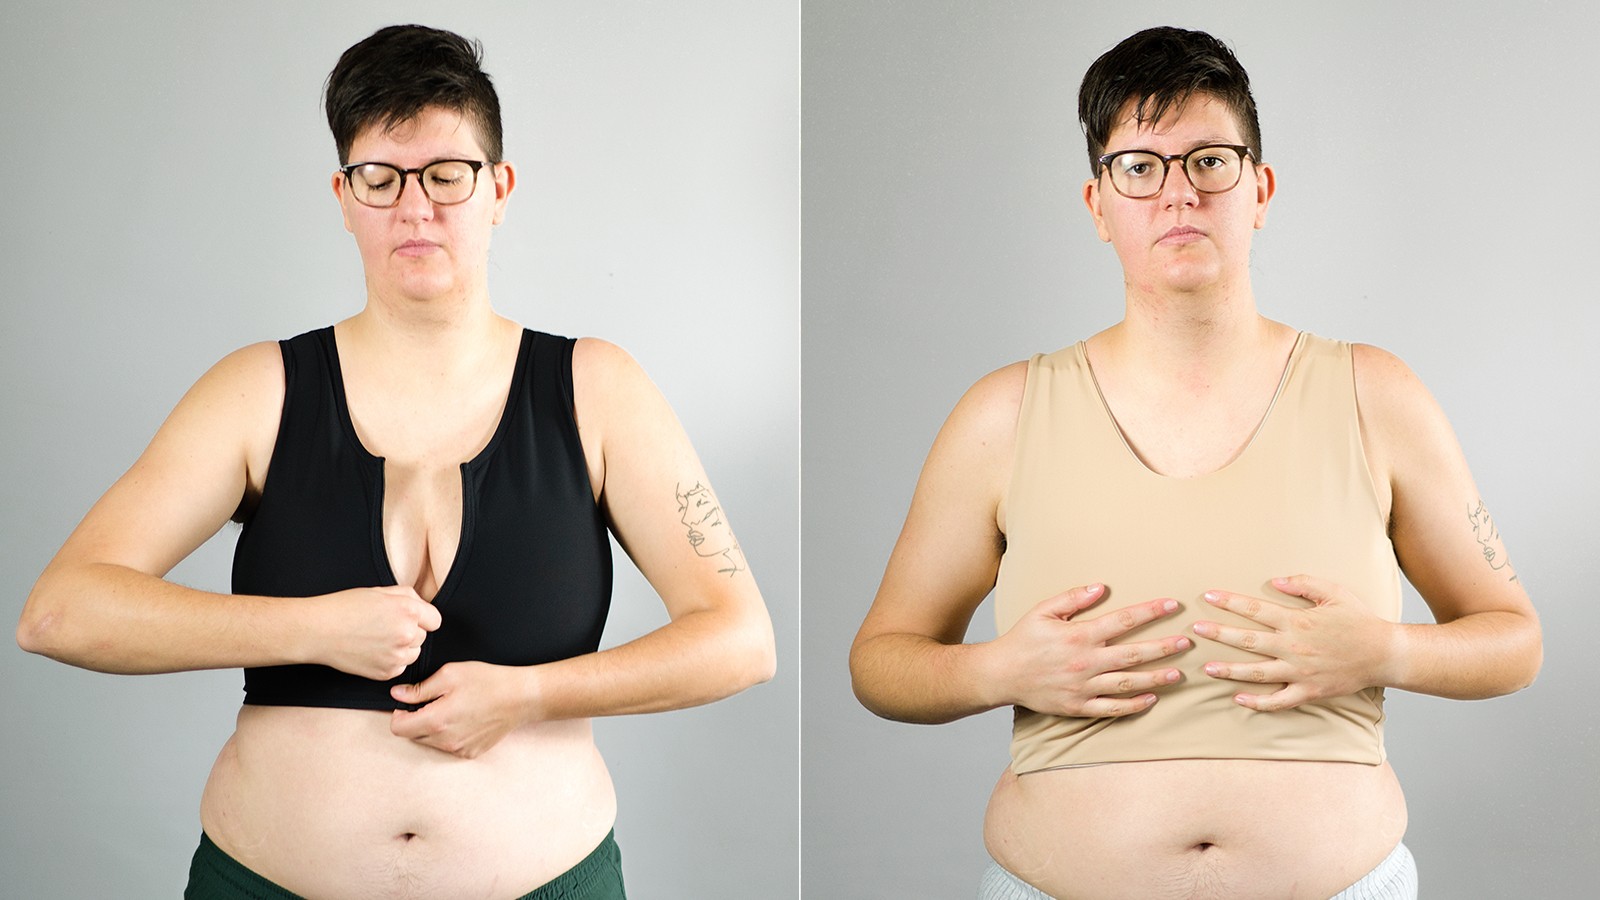 Chest or breast binding: Tips, side effects, safety, and more